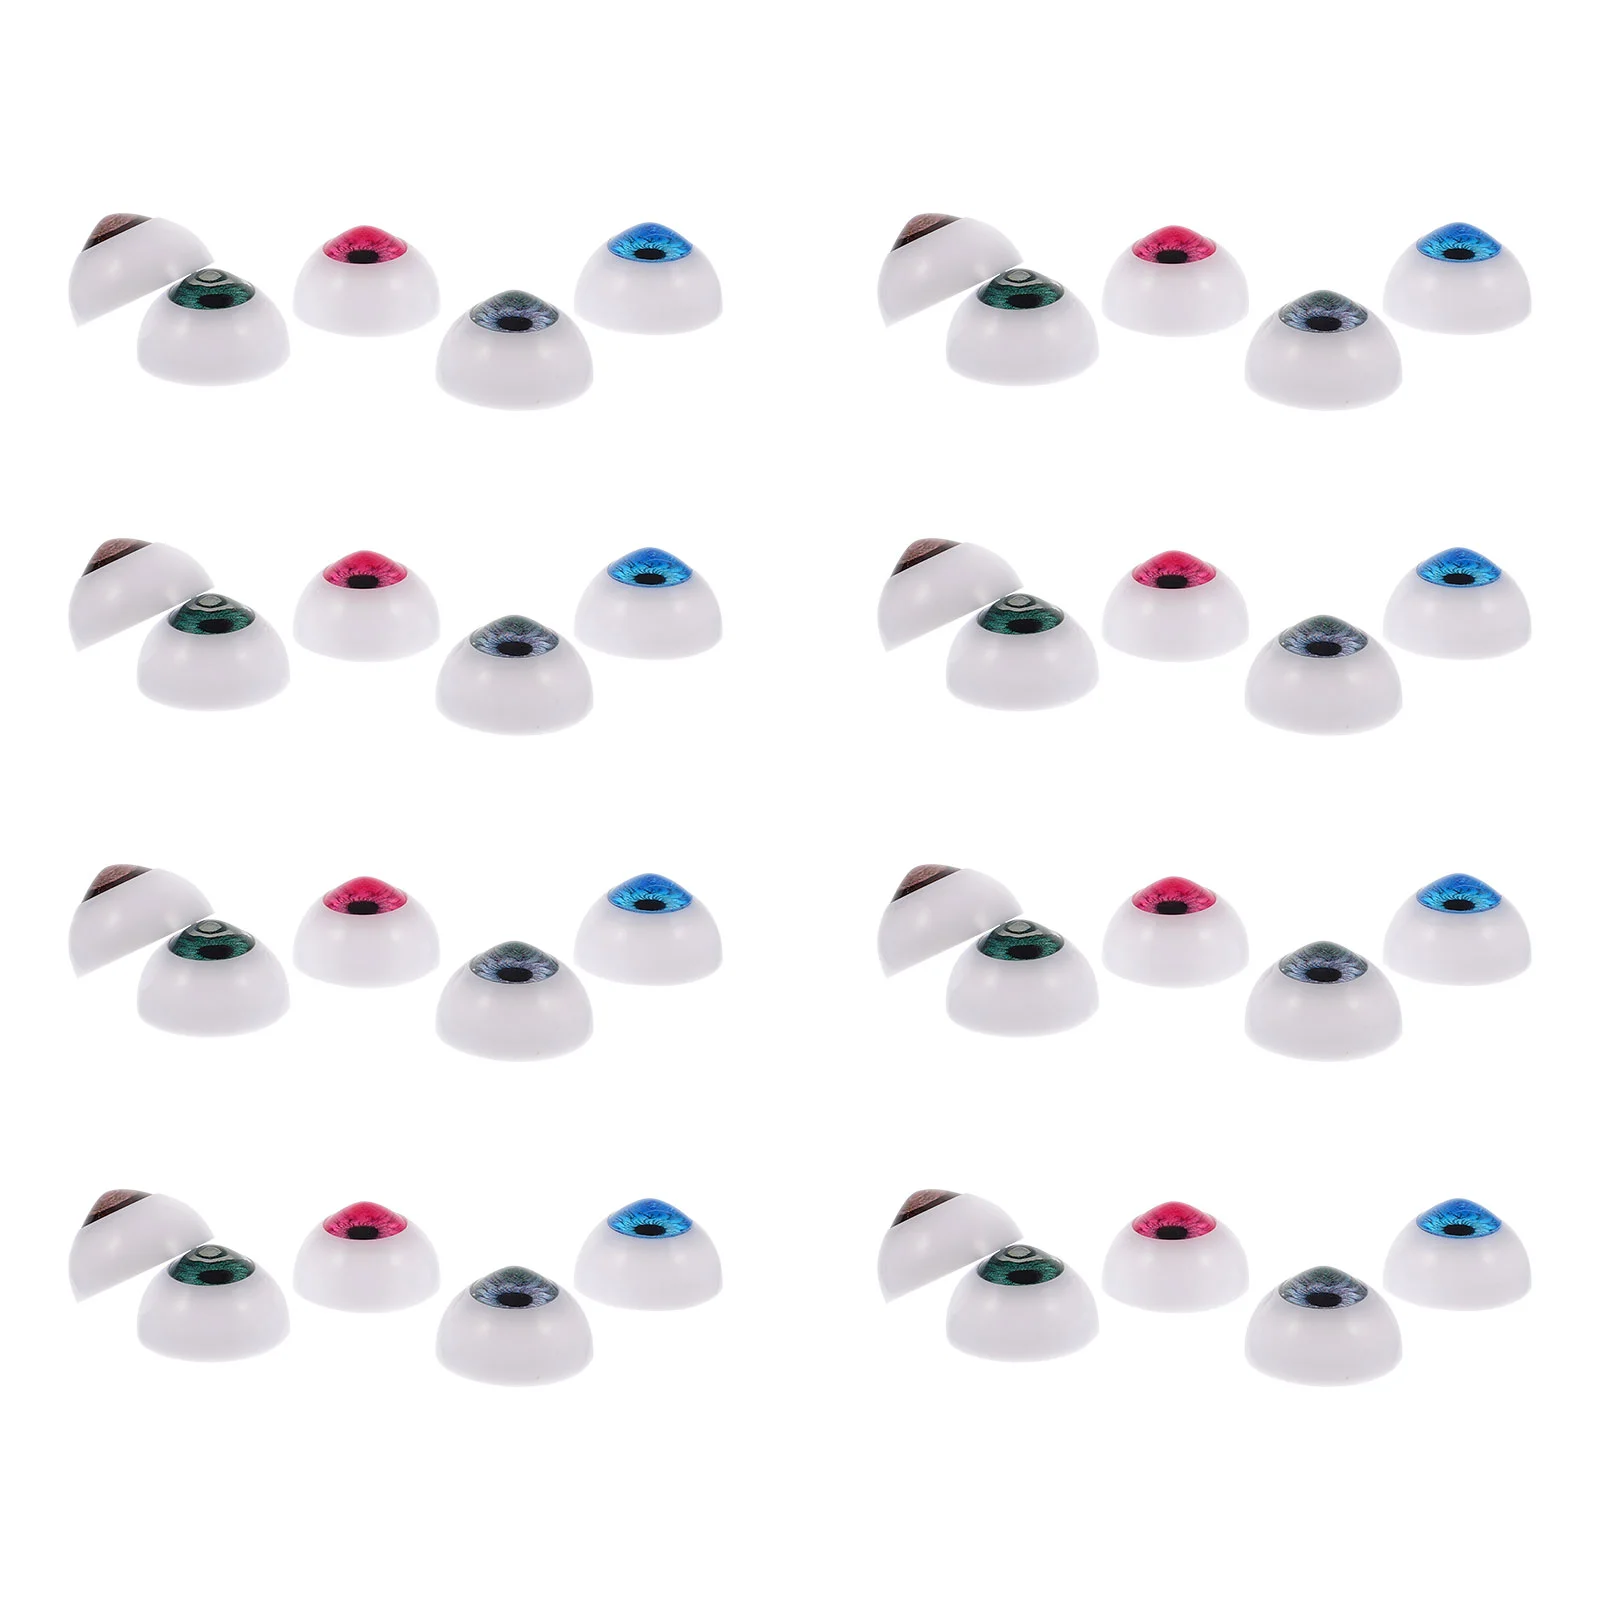 50 Pcs Decor Artificial Eyes DIY Material Halloween Props Realistic Acrylic Eyeball Eyeballs Craft Supplies Crafts 12 18 24 36 colors professional acrylic paints set 12ml hand painted wall drawing craft painting pigment set art supplies